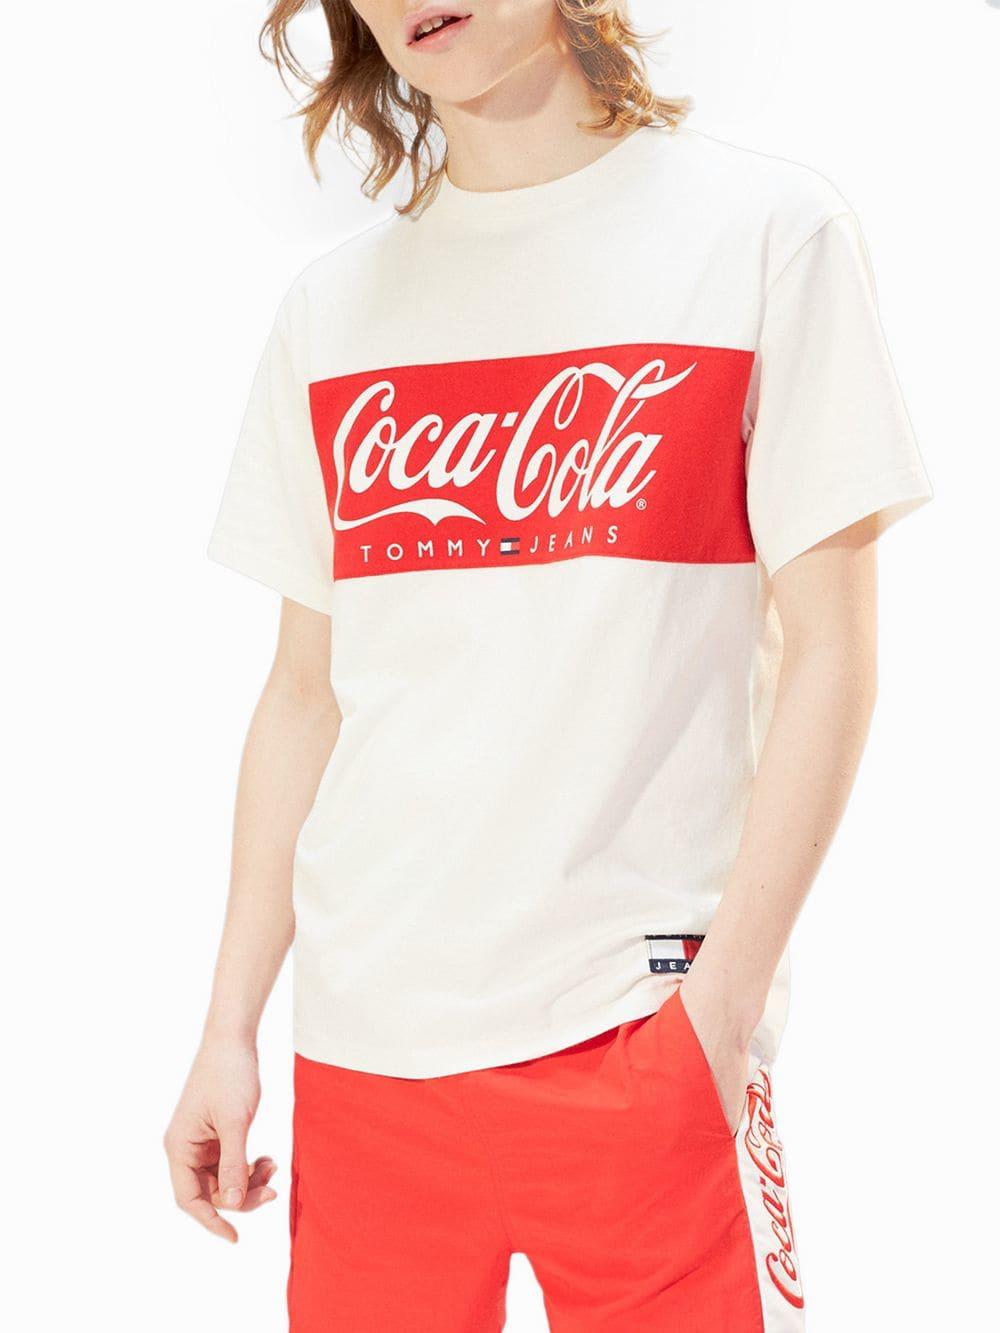 tommy jeans coca cola t shirt Off 53% - wuuproduction.com